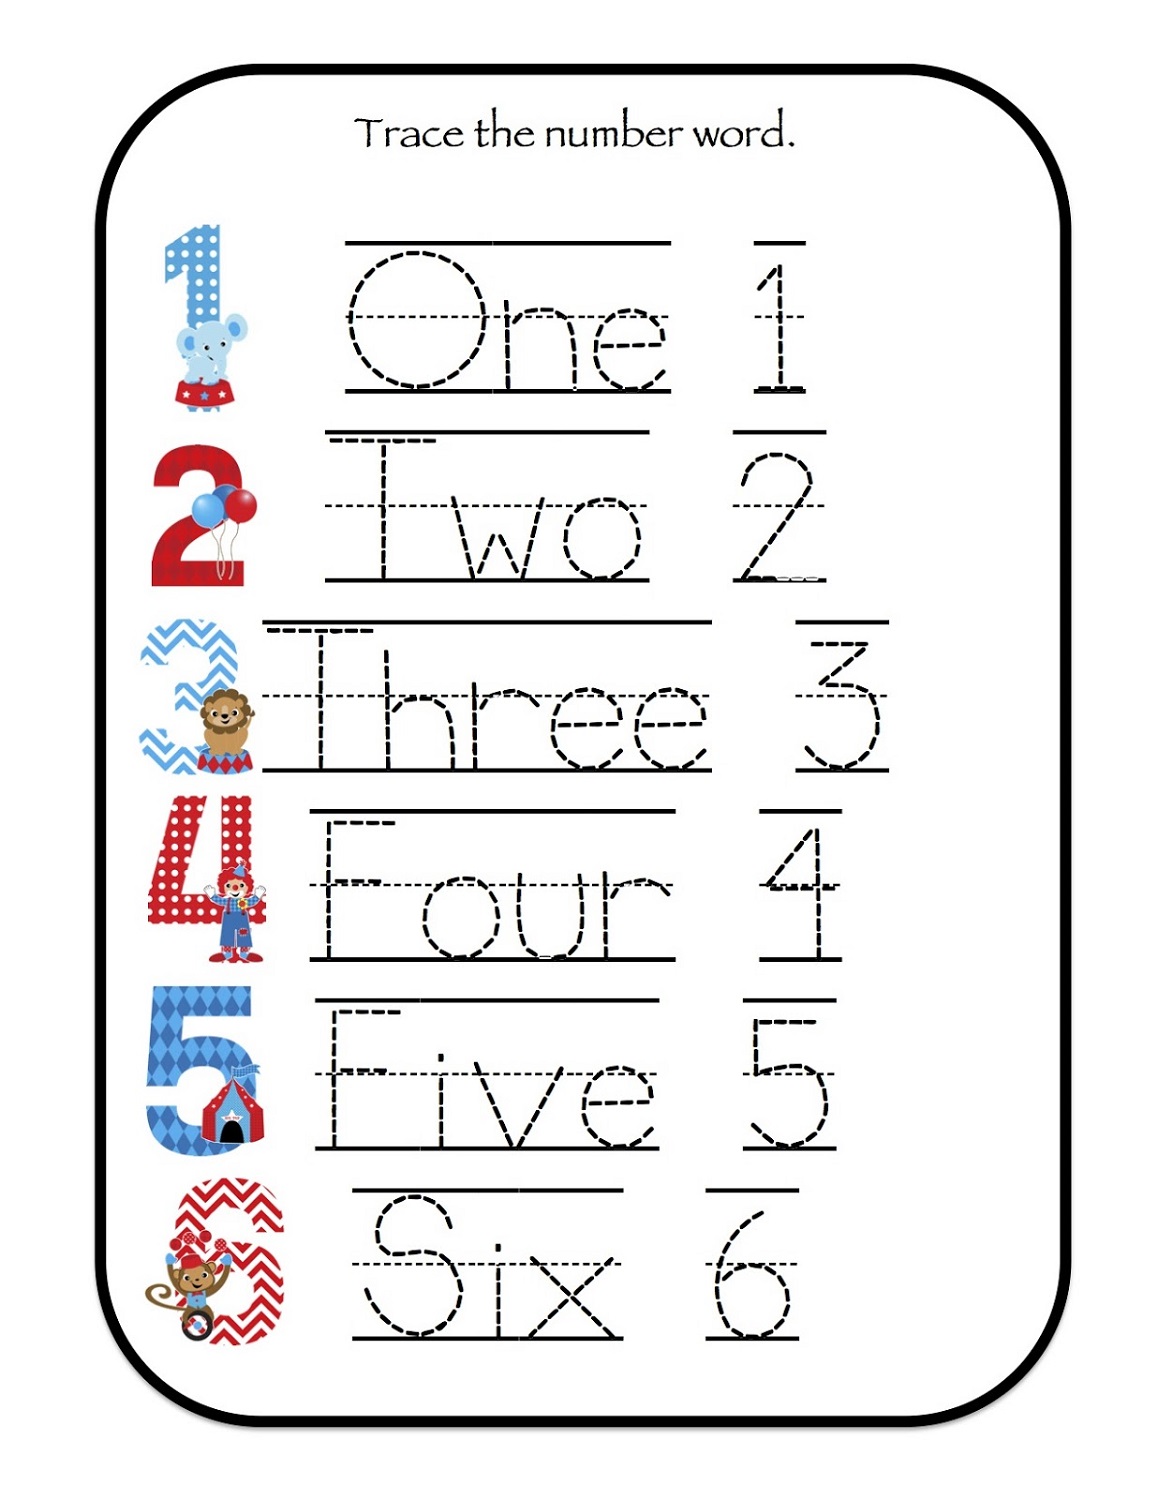 Free Printable Trace Numbers Web Free Printable Tracing Number Worksheets To Help Young Children 